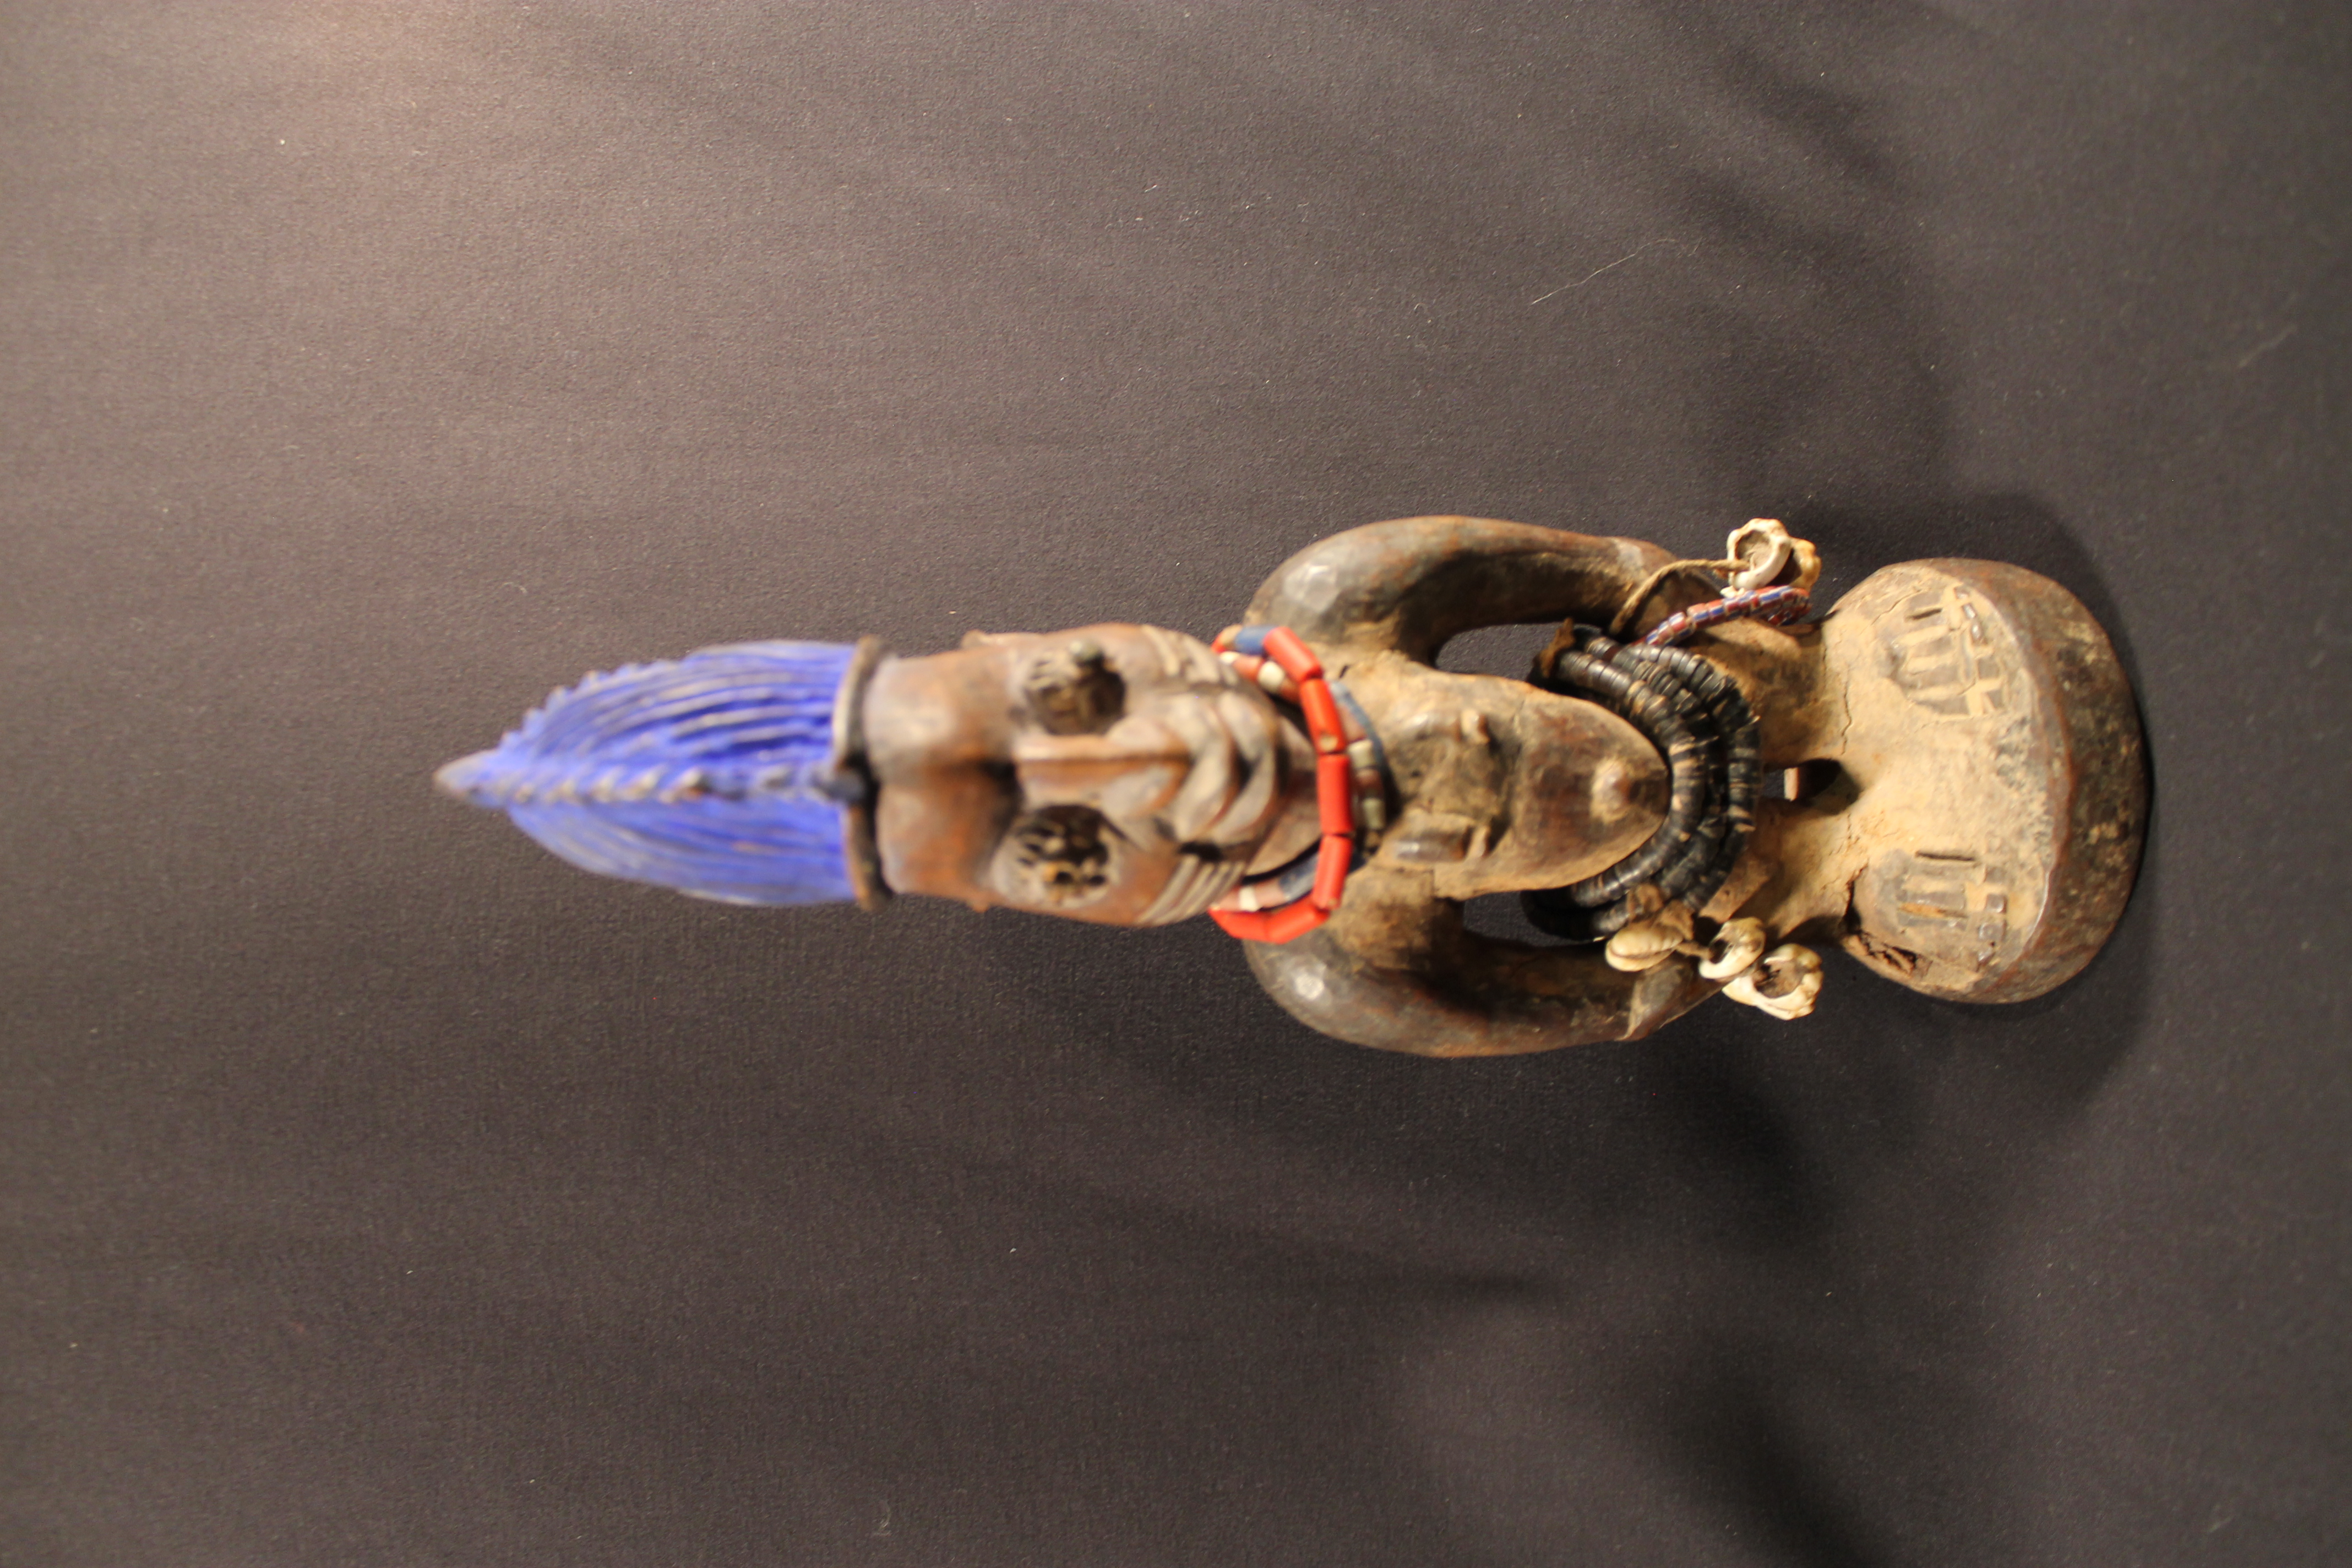 Figure is standing tall with a narrow face and bright blue hair. The figure is adorned with beaded necklaces and bracelets made of teeth. 